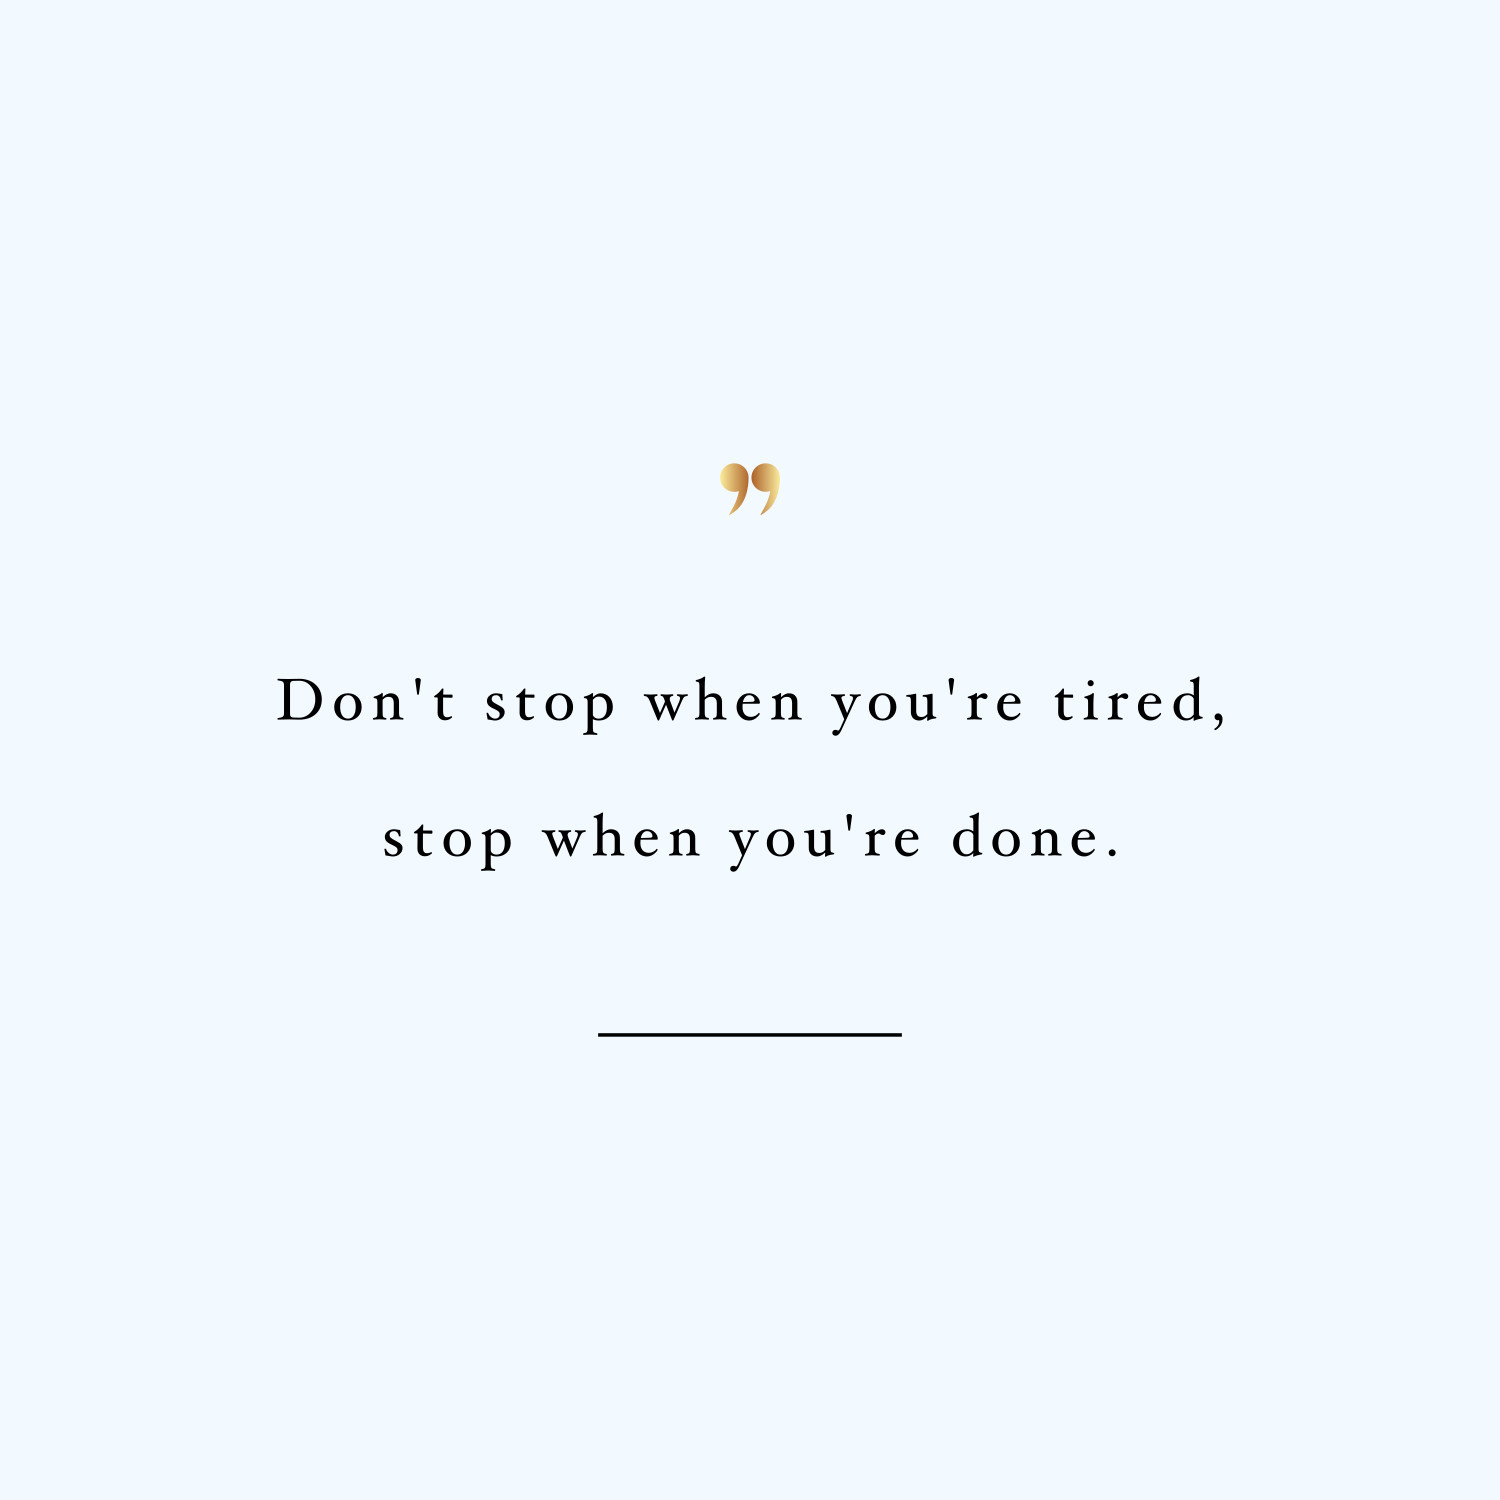 Don't stop! Browse our collection of inspirational training quotes and get instant workout and fitness motivation. Transform positive thoughts into positive actions and get fit, healthy and happy! https://www.spotebi.com/workout-motivation/training-quote-dont-stop/